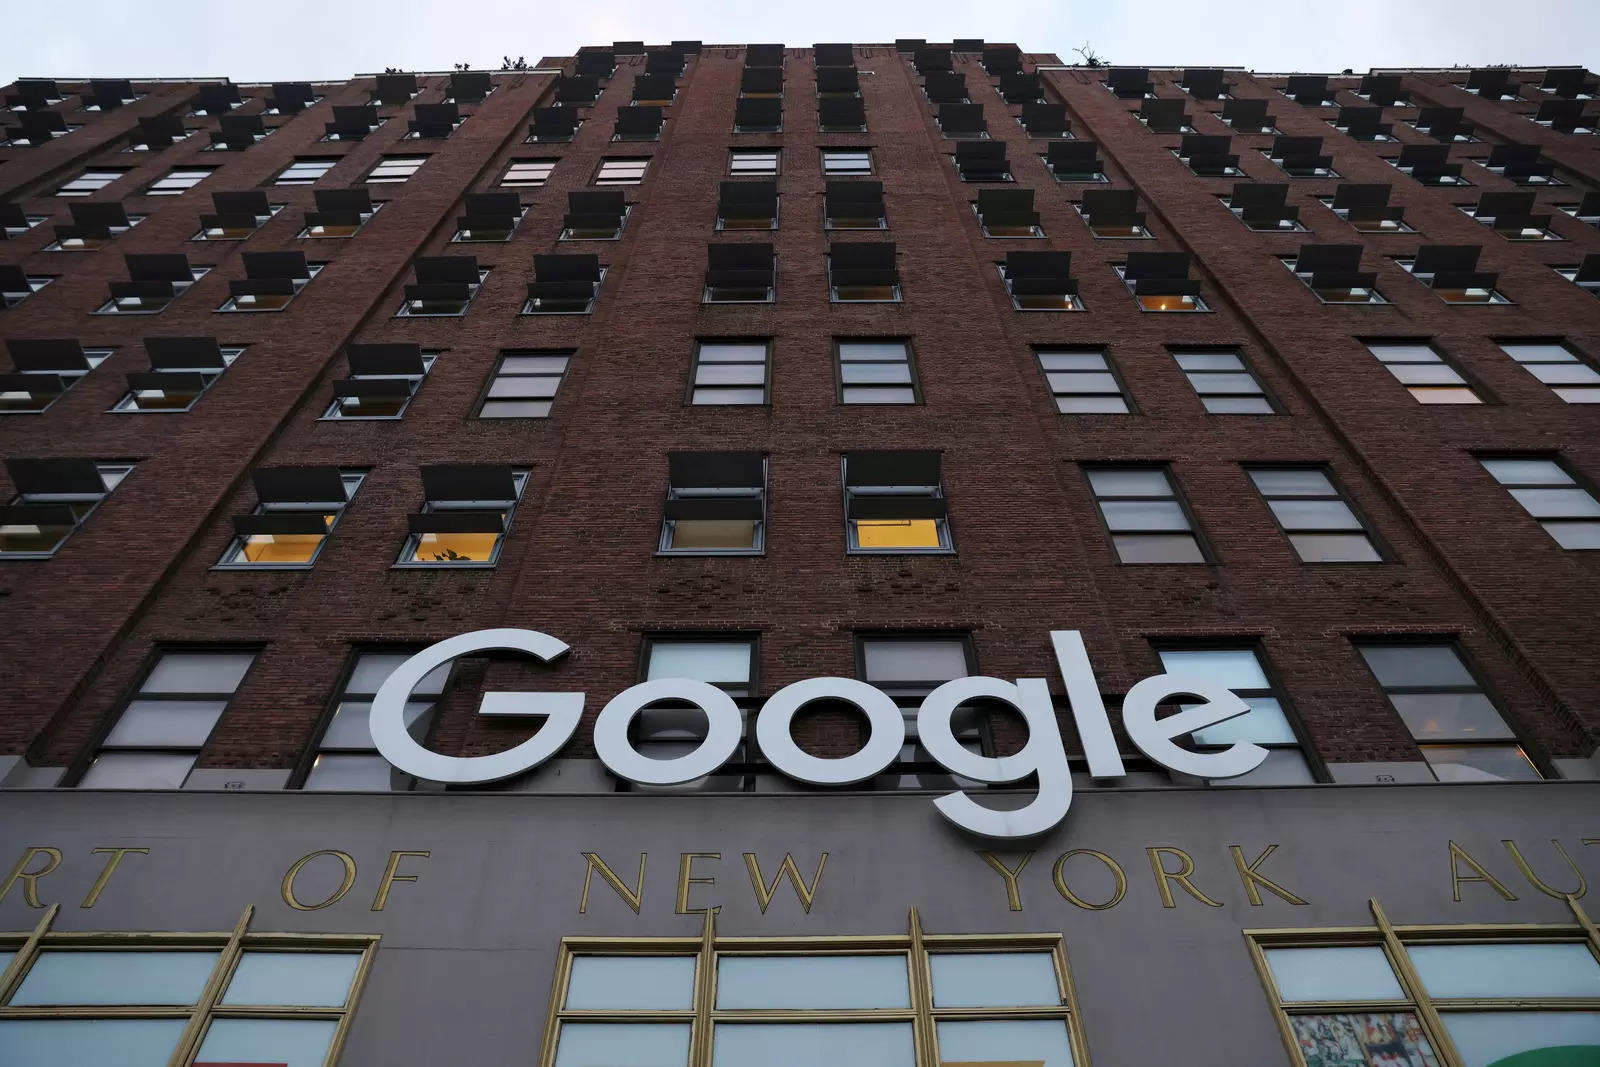 Google real estate executive says 5% more workers coming in to office each week